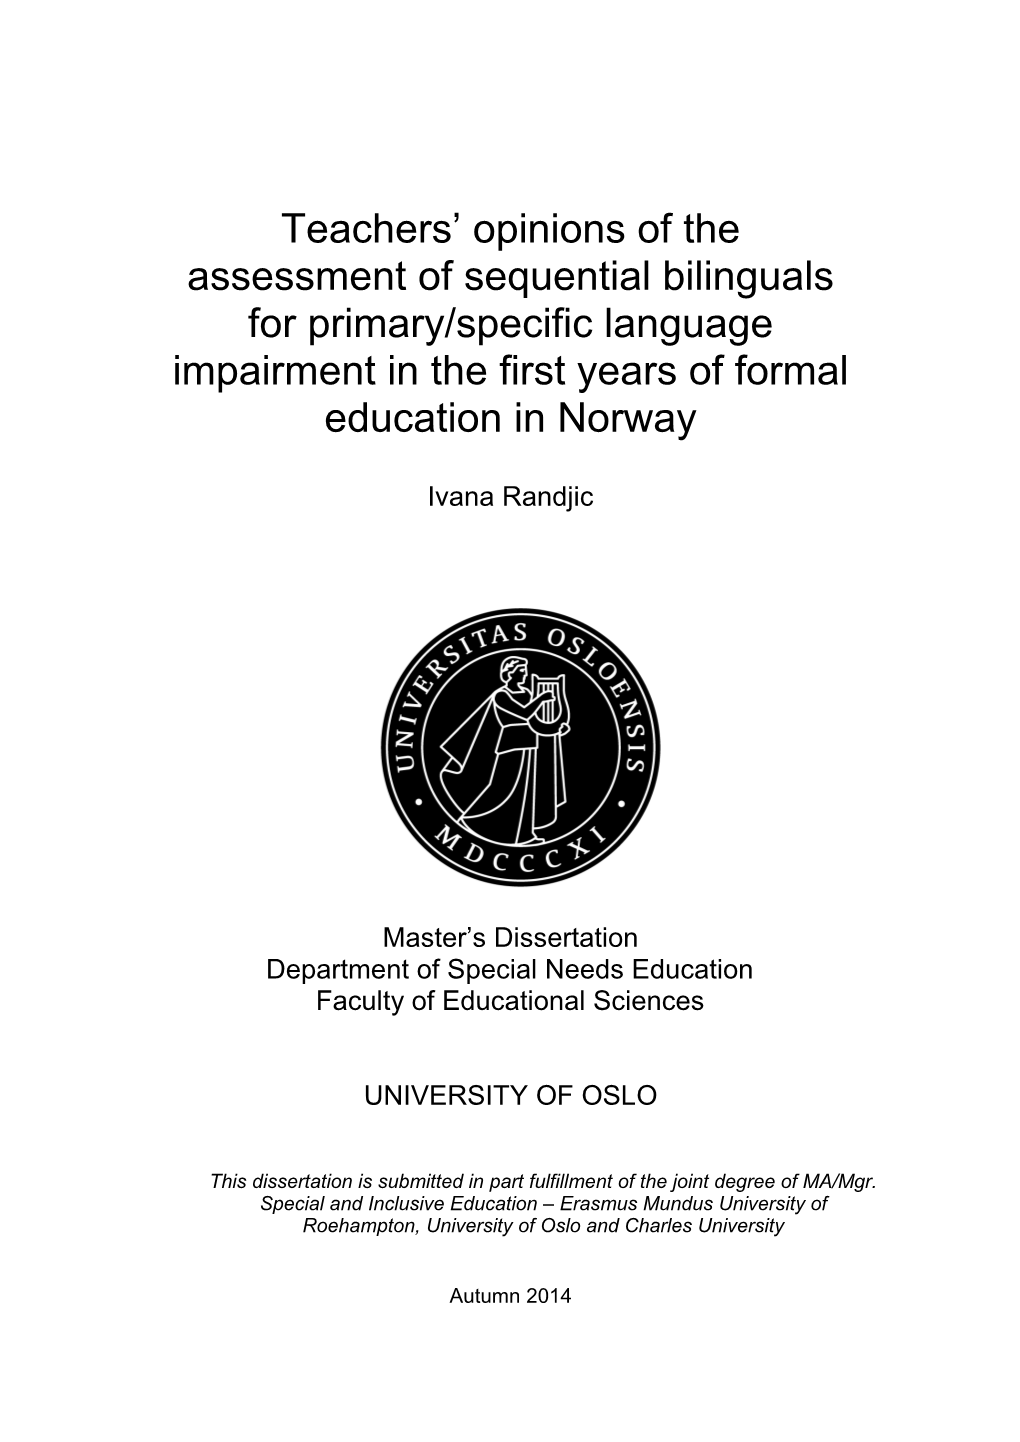 Teachers' Opinions of the Assessment of Sequential Bilinguals for Primary